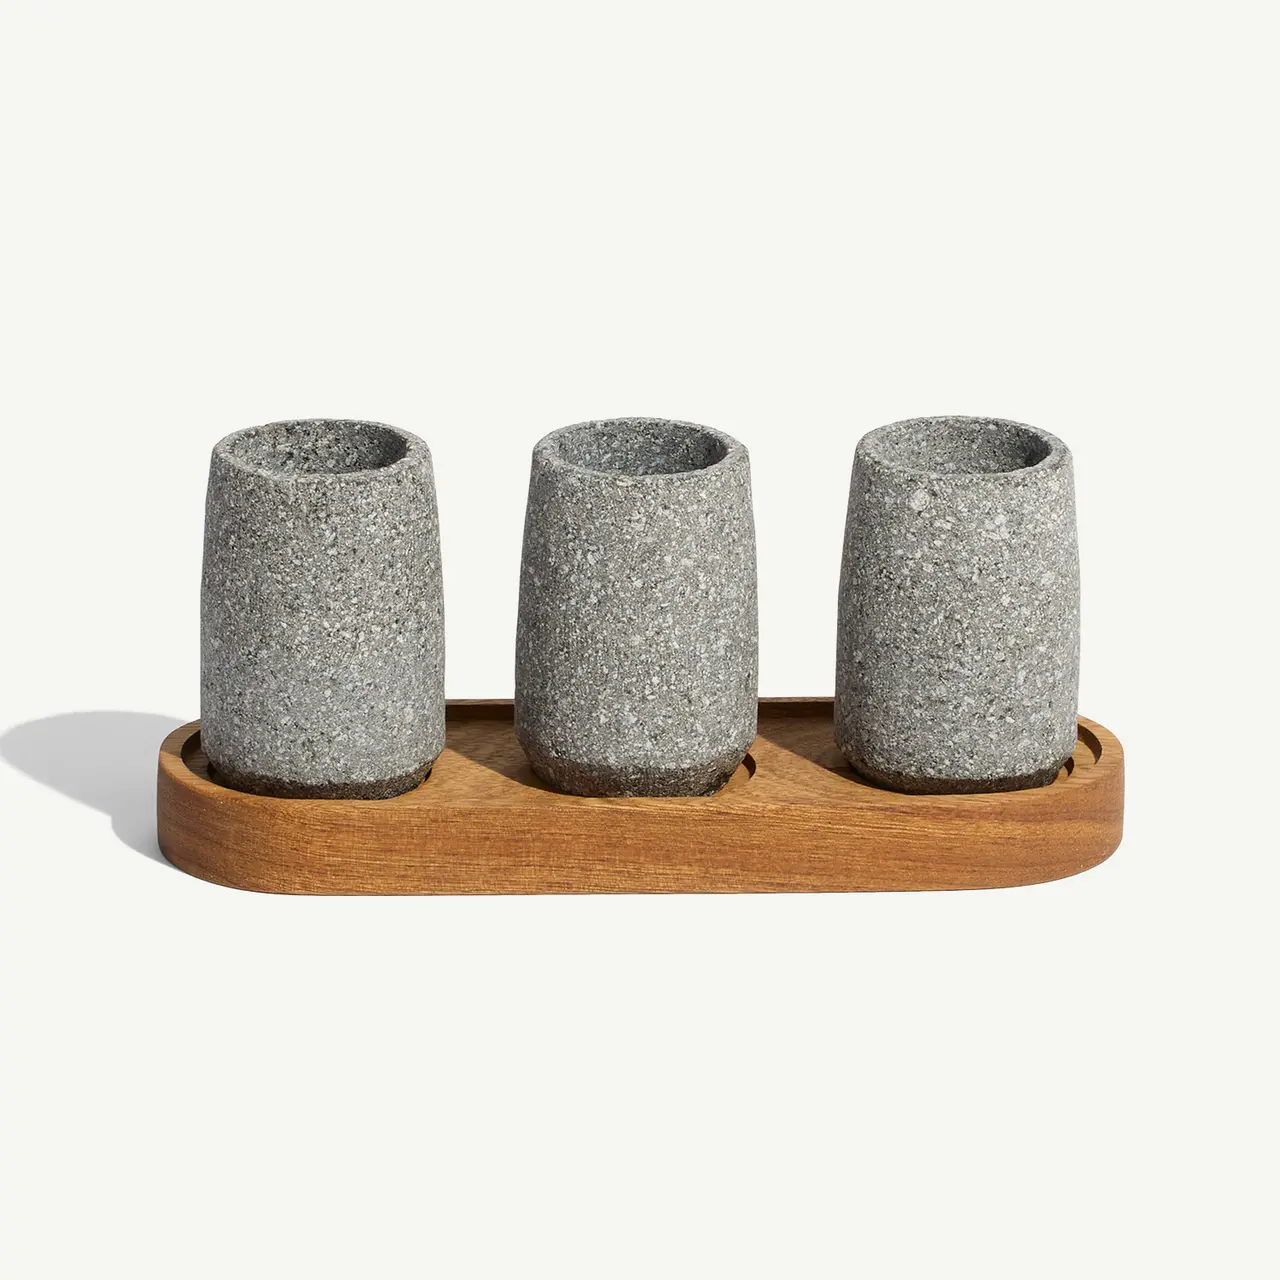 Three cylindrical stone cups sitting on a wooden tray against a plain background.